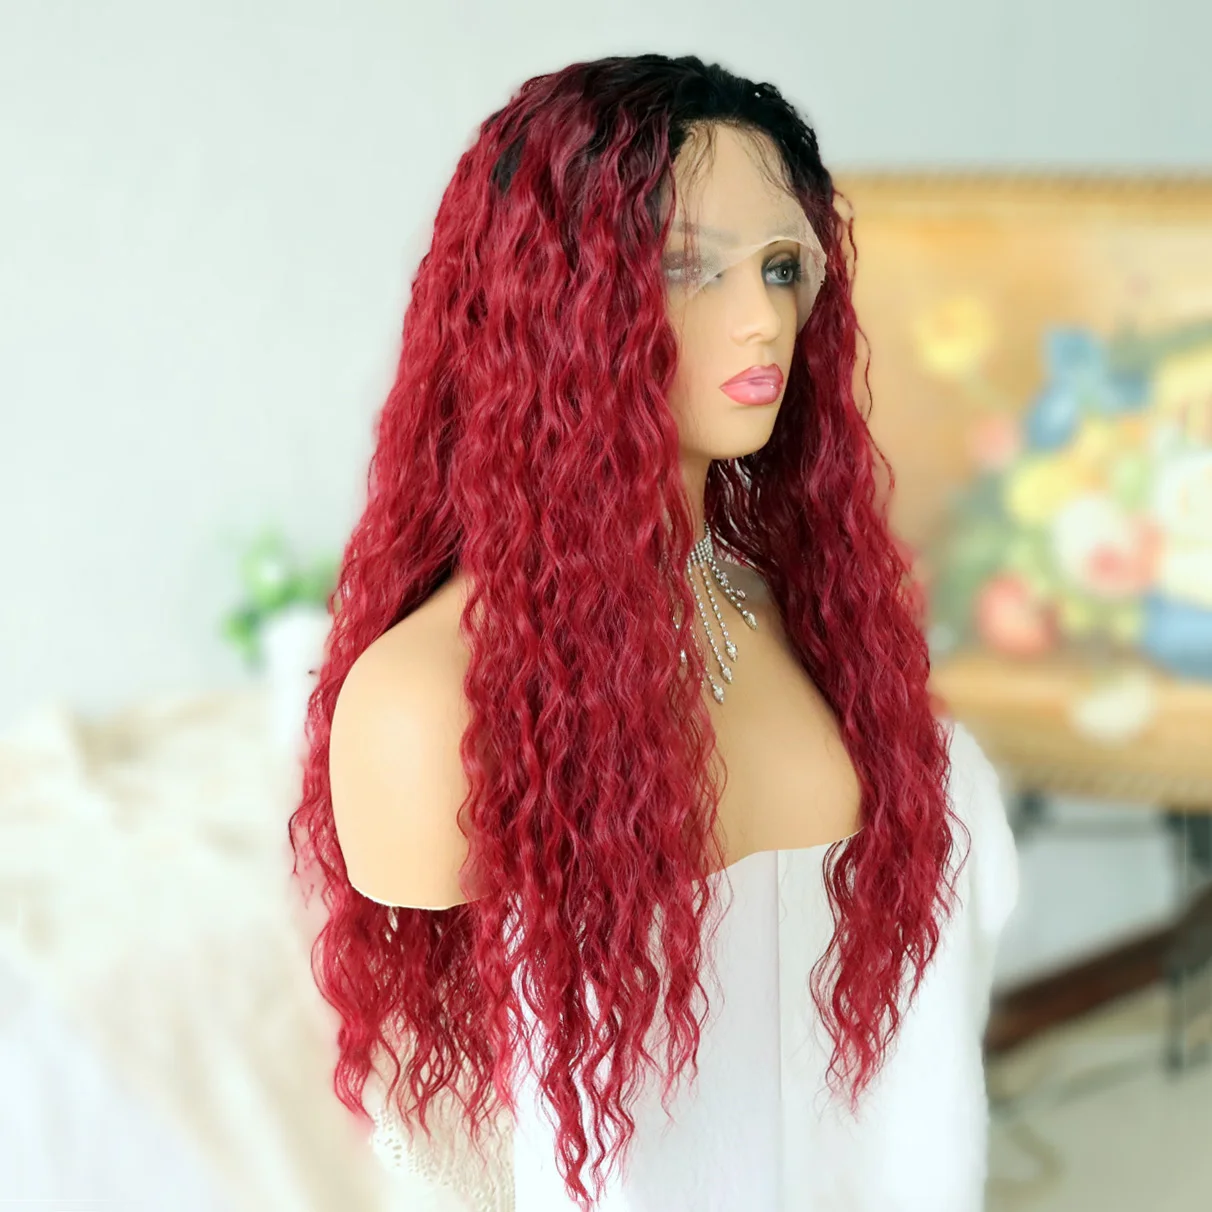 Red Curly Lace Front Wigs for Black Women Ombre Wine Red Synthetic Wigs Long Loose Curly Wigs 24 Inch Heat Resistant Fiber Wigs